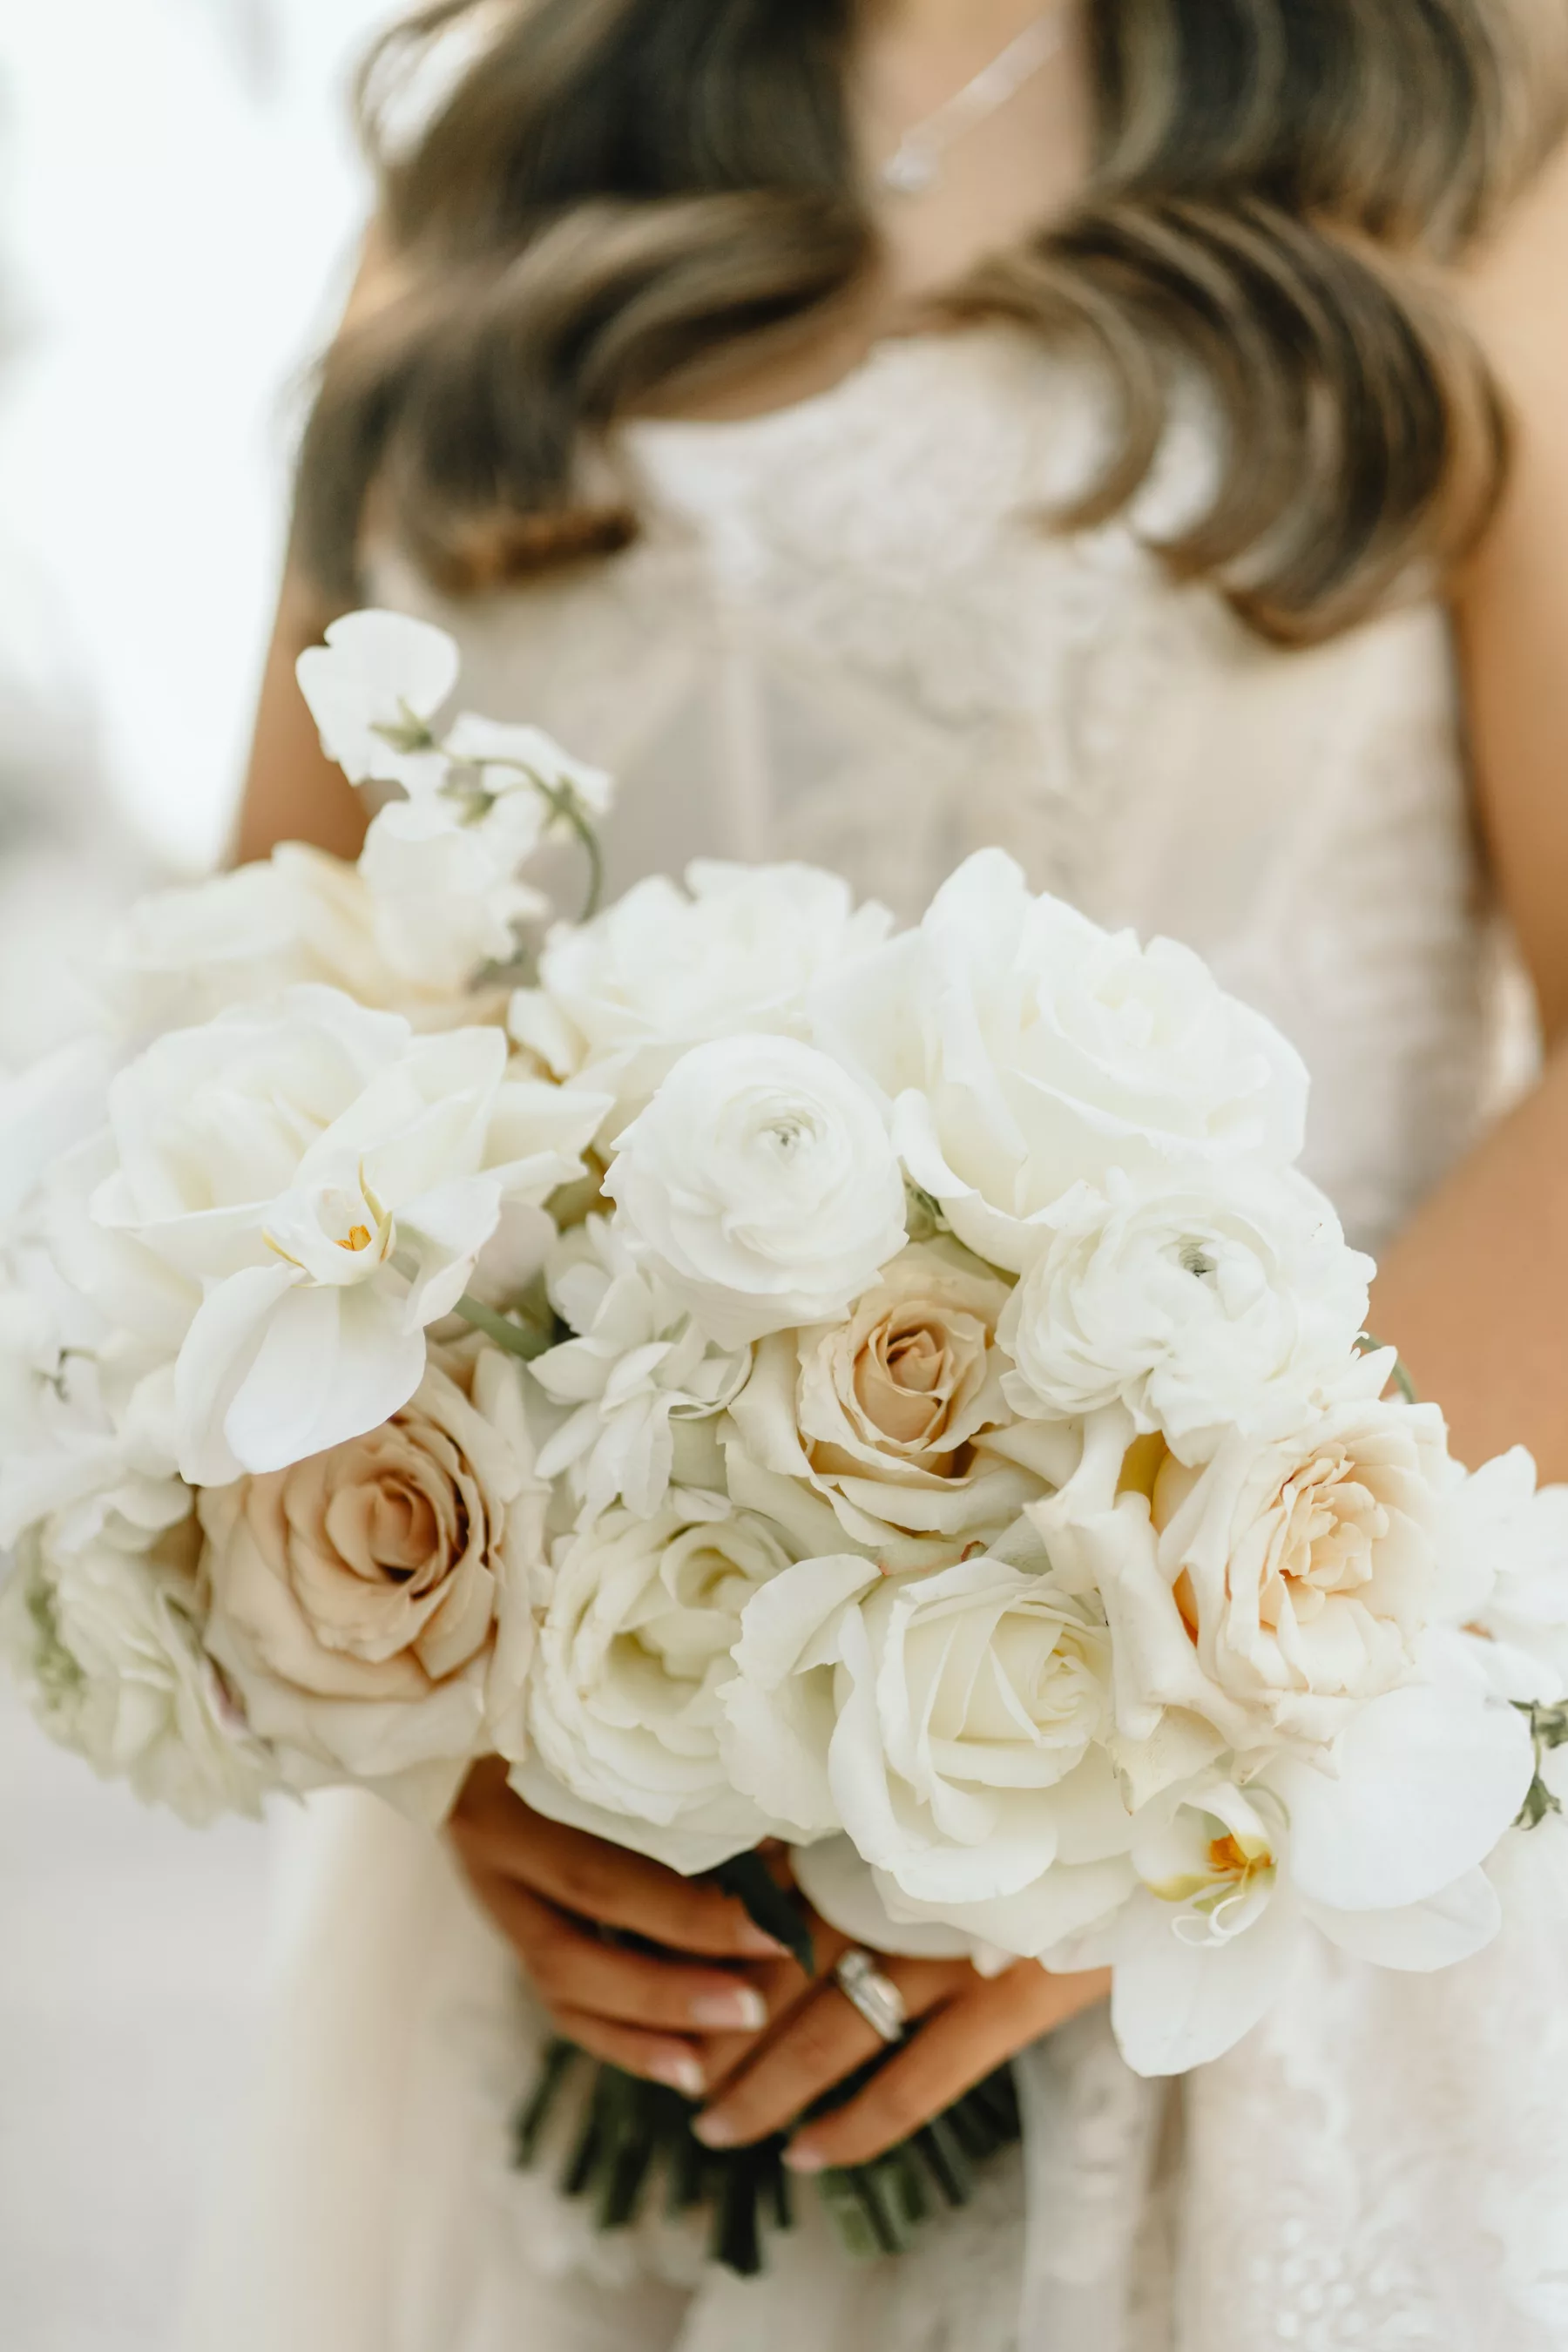 Monochromatic Bridal Bouquet with Orchids and White and Pink Roses Ideas | Tampa Bay Florist Bloom Shakalaka